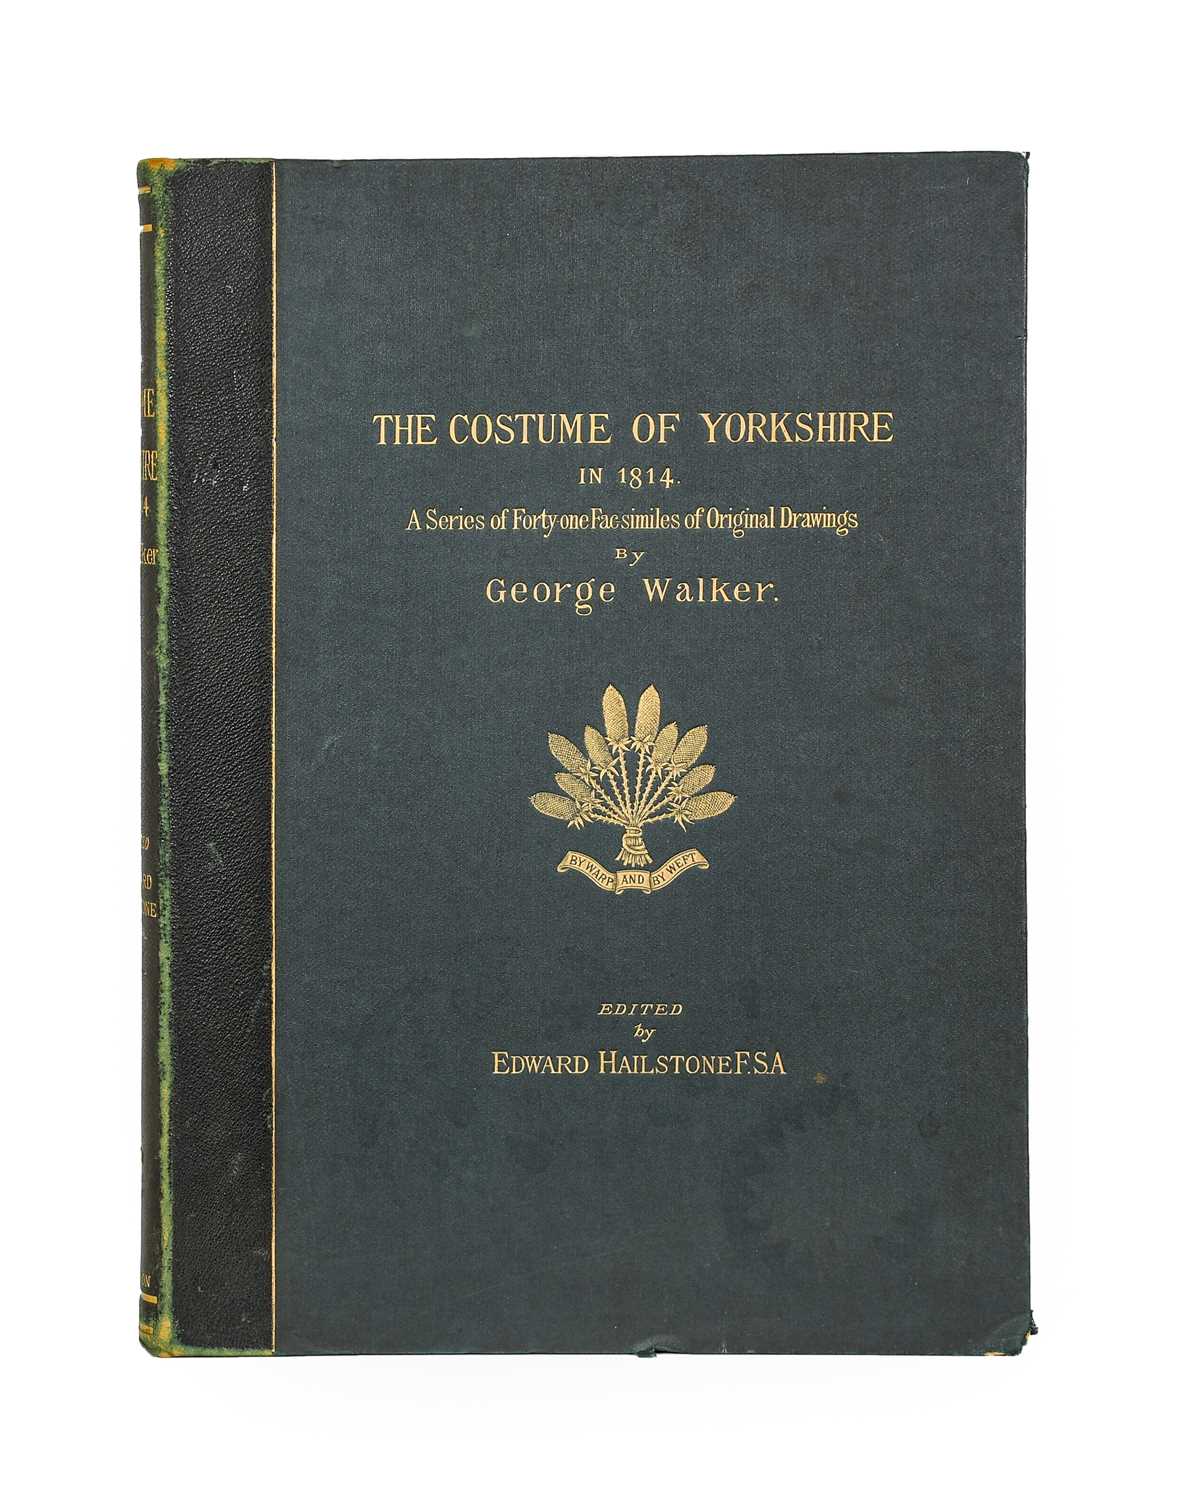 Lot 33 - Walker (George). The Costume of Yorkshire, 2nd edition, 1885, one of 500 copies